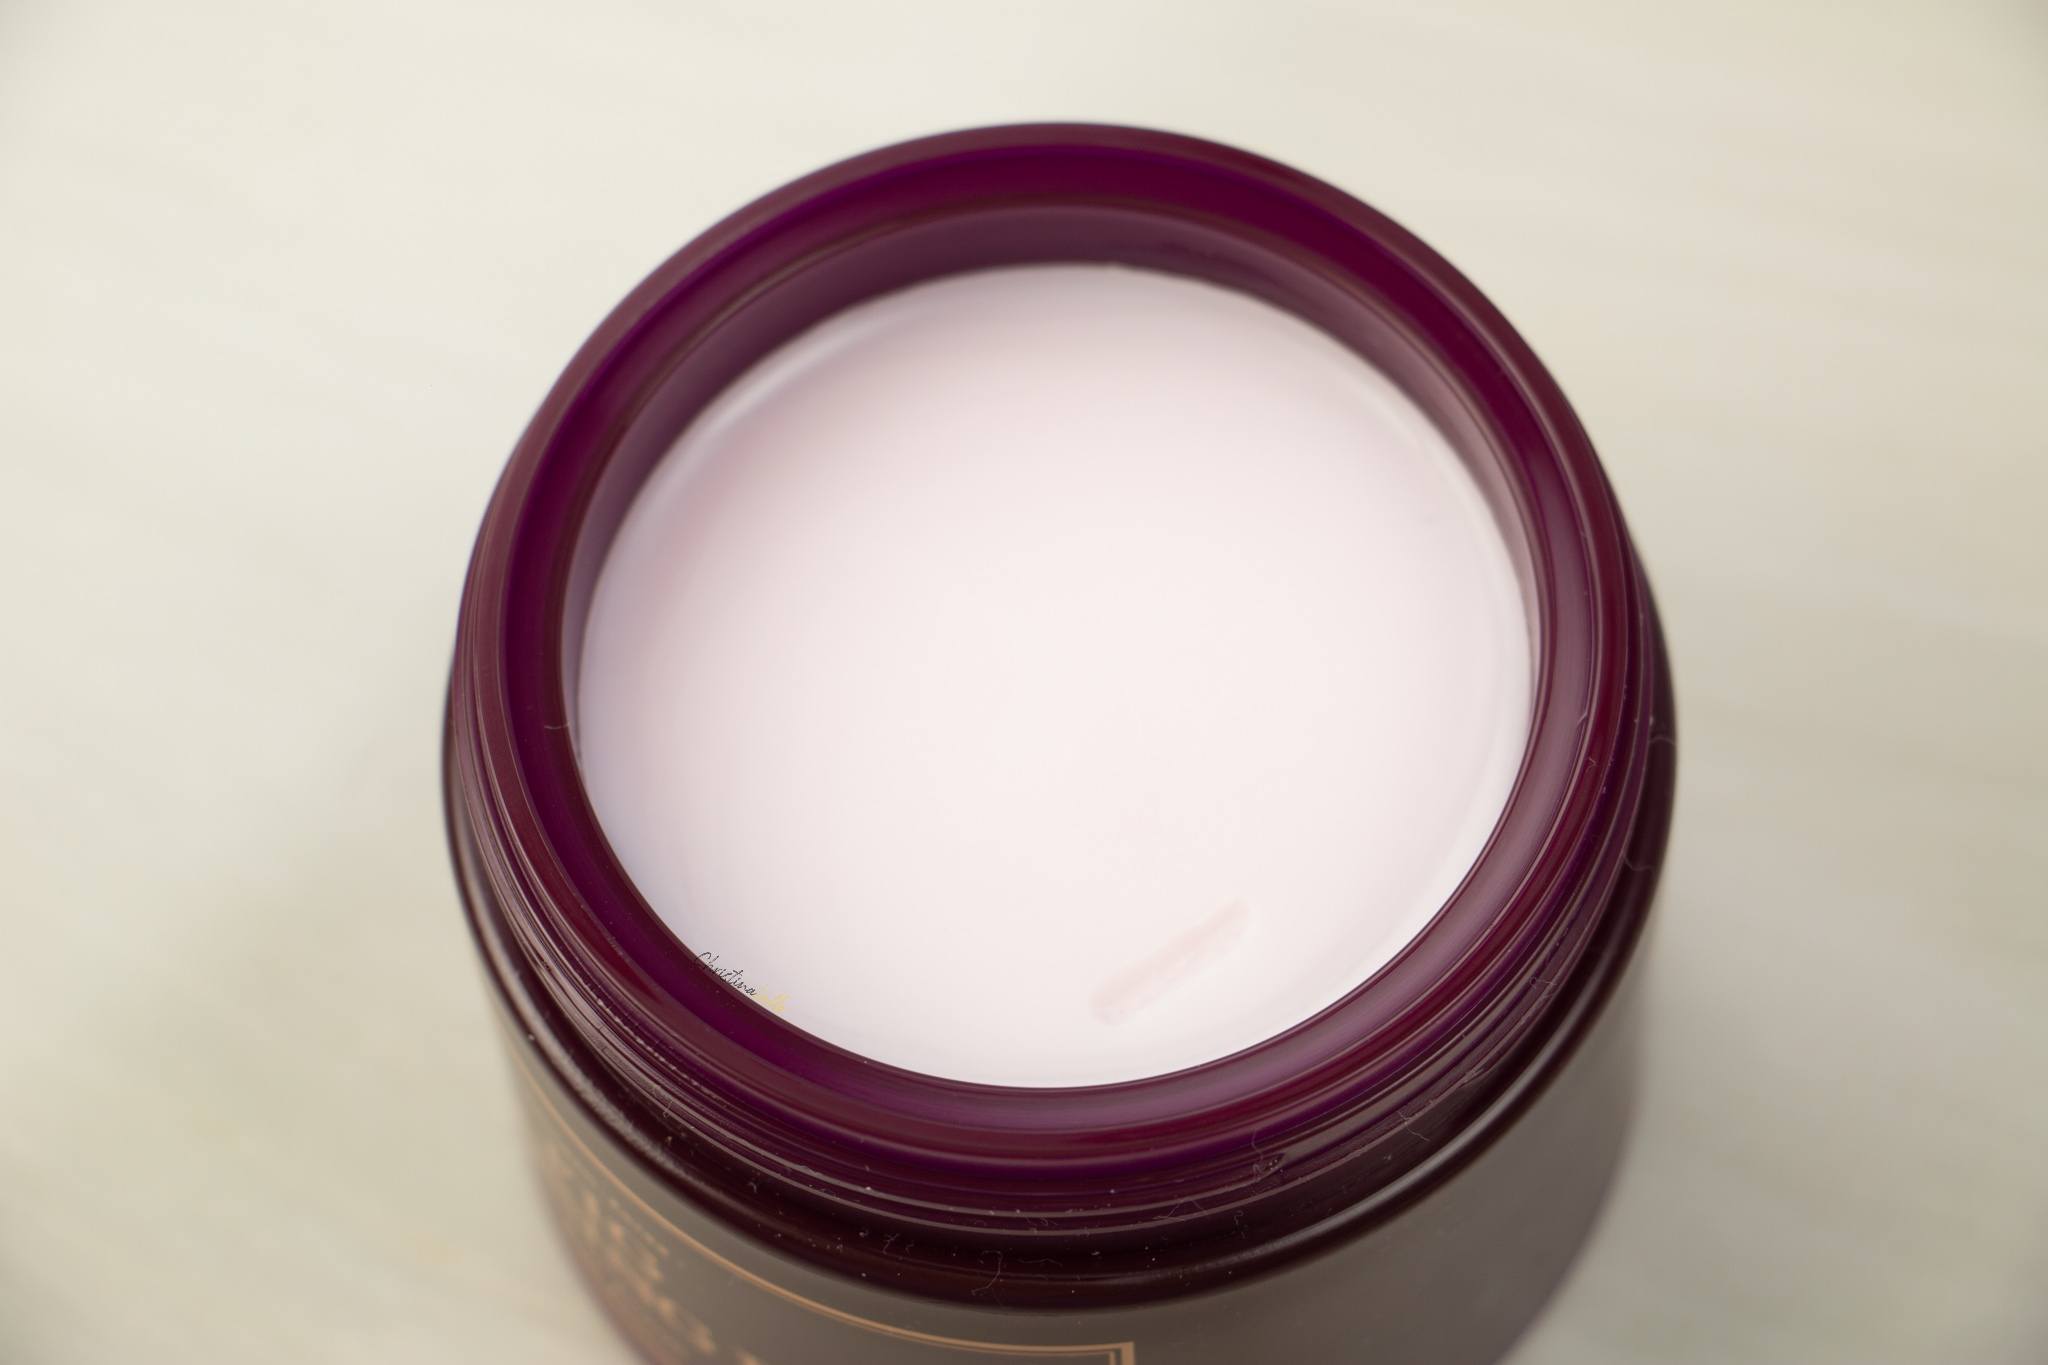 The texture is just like any other cleansing balm, like ones from Banila co...